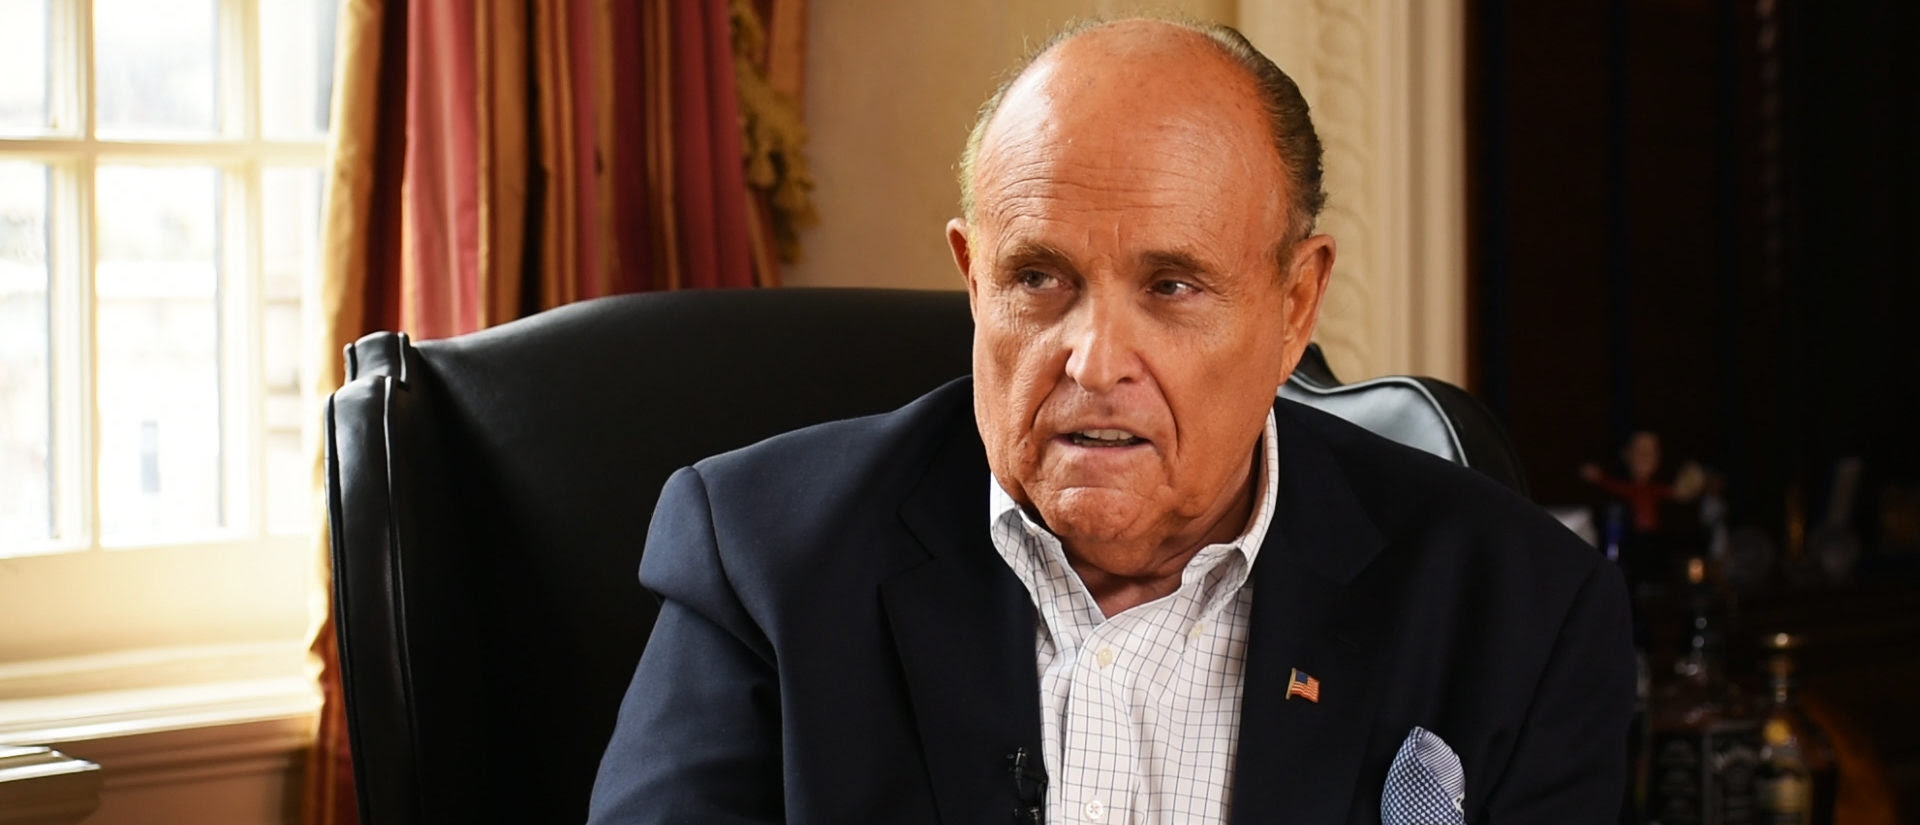 Giuliani — After Giving Us The Hard Drive, He’s Now Directly Accusing Biden Of Two Specific Crimes. Do You Believe Him? ?u=https%3A%2F%2Fcdn01.dailycaller.com%2Fwp-content%2Fuploads%2F2020%2F10%2FComp-9_10321-e1604099643914